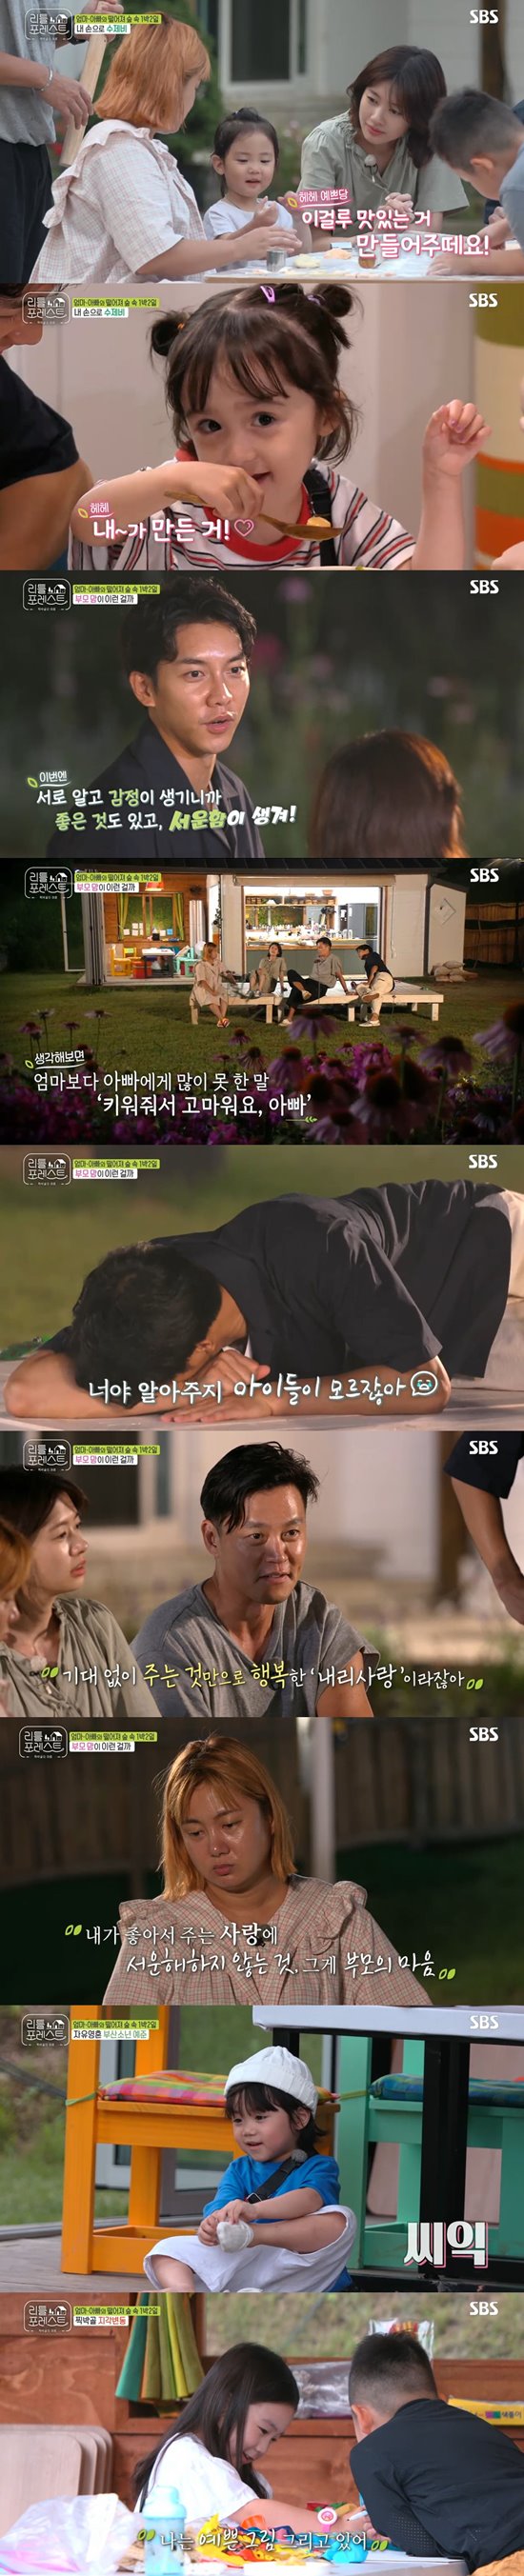 The members of Little Forest shared their parents hearts in the second parting.On SBSs Entertainment Little Forest, which aired on the last three days, the second farewell with Little and the third meeting with two new friends were drawn.After a dip in Valley, Lee Hyun, Brooke and Grace fell asleep; Jeong Han, Lee Han, had a romantic time talking about rising up with Uncle Seung-gi, looking at the sky.Lee Seung-gi said, I think of Conbijijige, while Jung Han-i said, Popcorn comes up, and Lee Han-i said, It is a Dracula shape.Lee Seo-jin prepared Sujebi, which utilized the remaining white soup, as a lunch menu; Little also added fern hand and participated in making Sujebi himself.Littles were interested in the strange touch and shot hearts and star-shaped Sujebi.The thick chicken soup Sujebi was completed and the little ones started to eat more deliciously with the pride that they made it themselves.However, Lee Han-yi was unable to eat unlike usual due to his stamina, and he got up first and worried about everyone.The second breakup time came with Little. Littles went back to their parents and the members talked.Lee Seung-gi said, I know each other with my children and have feelings, so I have good things, but I feel sad. I thought I did not know my mind.Lee Seo-jin said, Children are love, and I do not want to be sad because I like it.The third meeting day at the Tjakbukol was followed. In the third meeting, four-year-old Busan boy Yejuni and six-year-old Gaoni joined.As soon as Ye Jun came, he took off his socks and walked around the ball and showed a free soul.Another new friend, Gaon, greeted the camera vigorously and ran around after the flying butterfly, boasting of his eldest sisters brilliance.Meanwhile, Lee approached the new Friend Gaon, who gave his name to him with a shy gesture and hovered around him.The members said, Lee Han was in love with Gaon in Brook. I was in love.At this point, Brooke appeared, and wondered how the triangular relationship between the three Littles, who had fallen alone, would lead to the broadcast every Monday and Tuesday at 10 pm.Photo = SBS